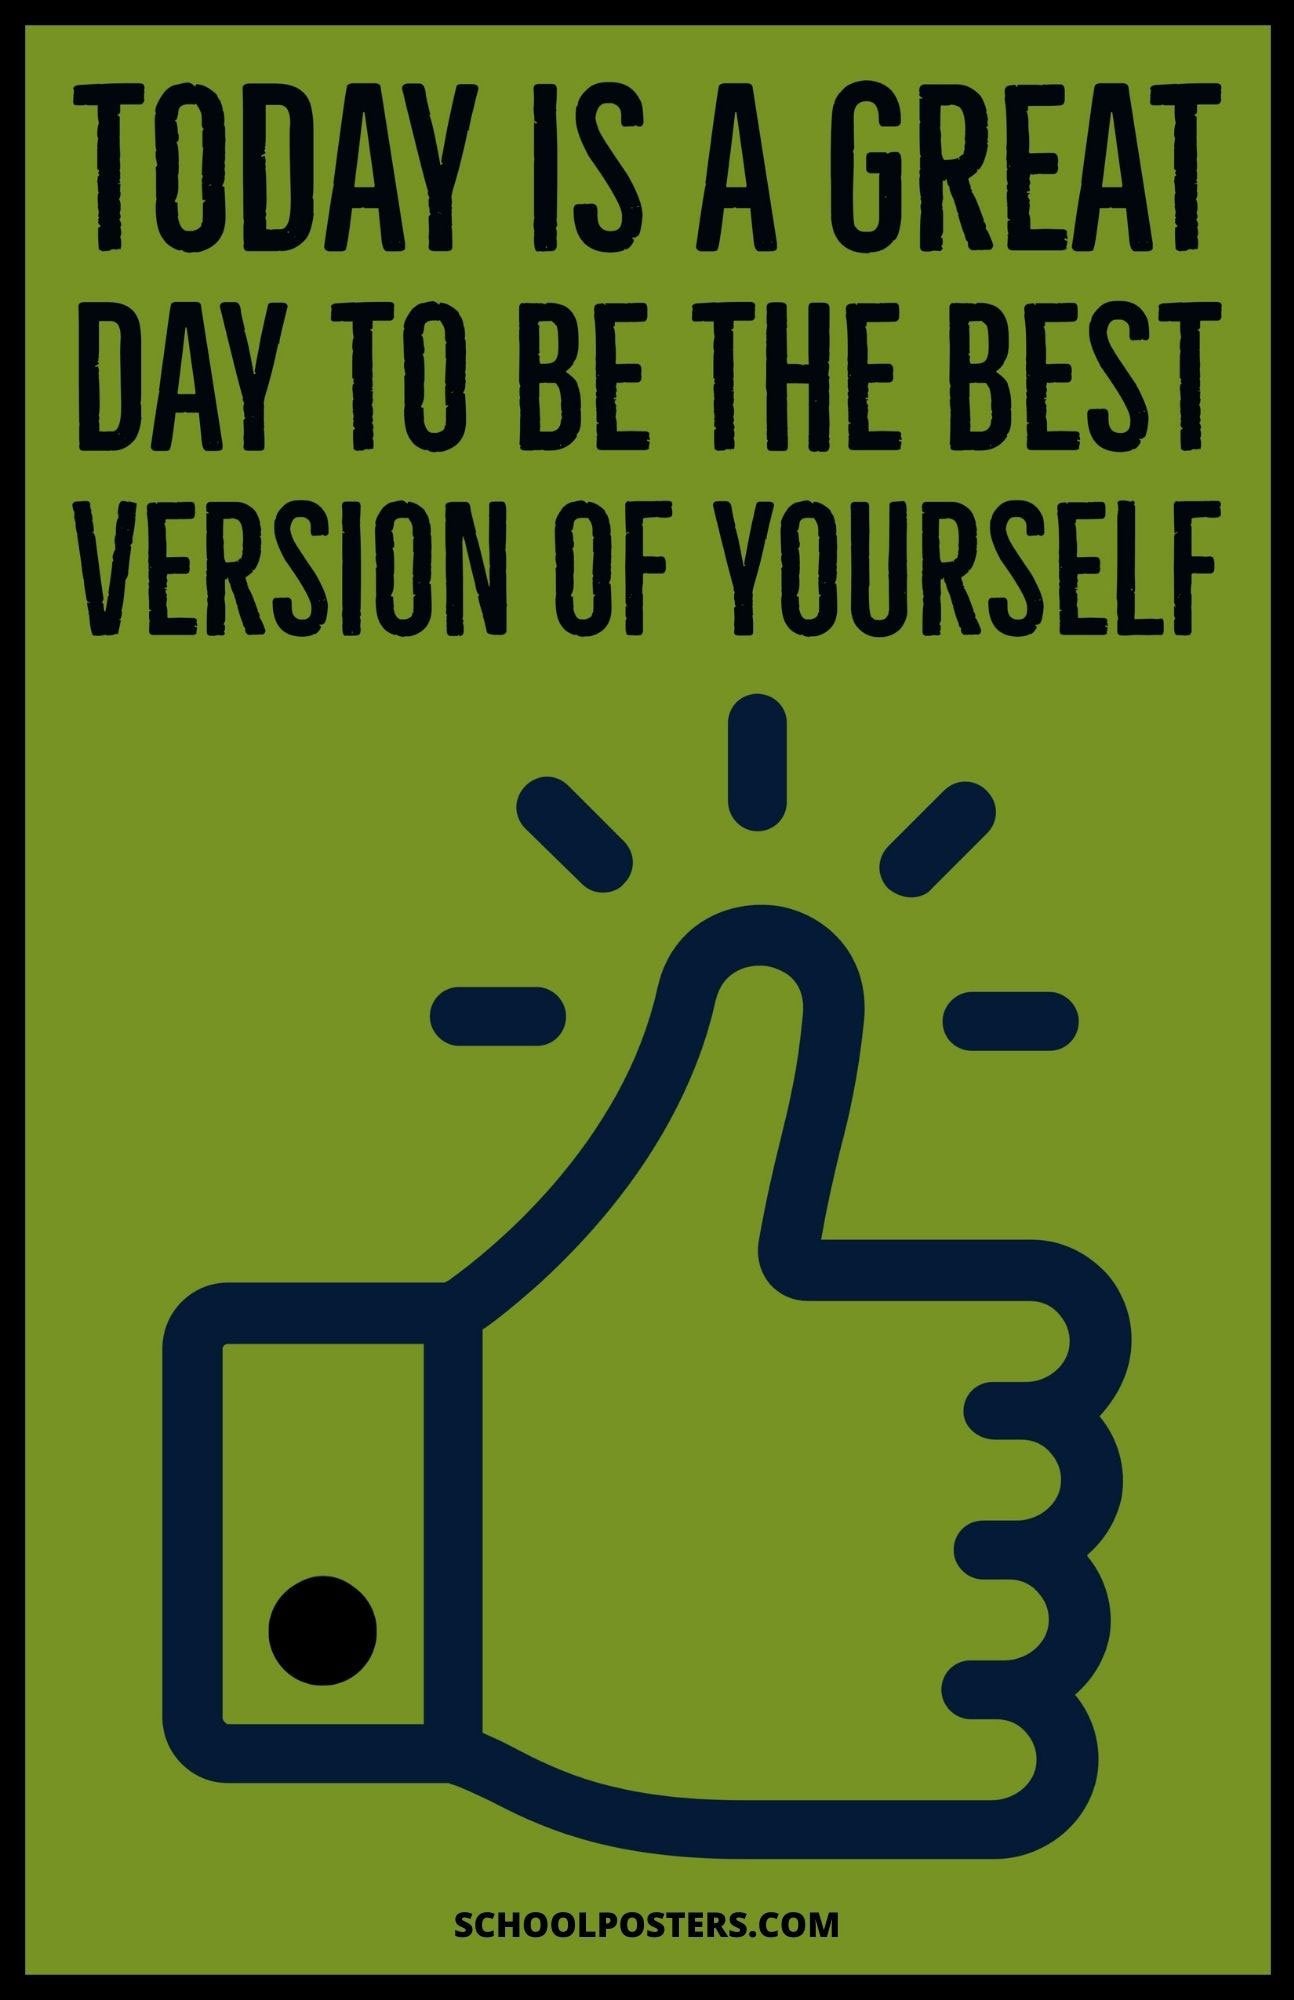 Today Is A Great Day To Be The Best Version Of Yourself Poster